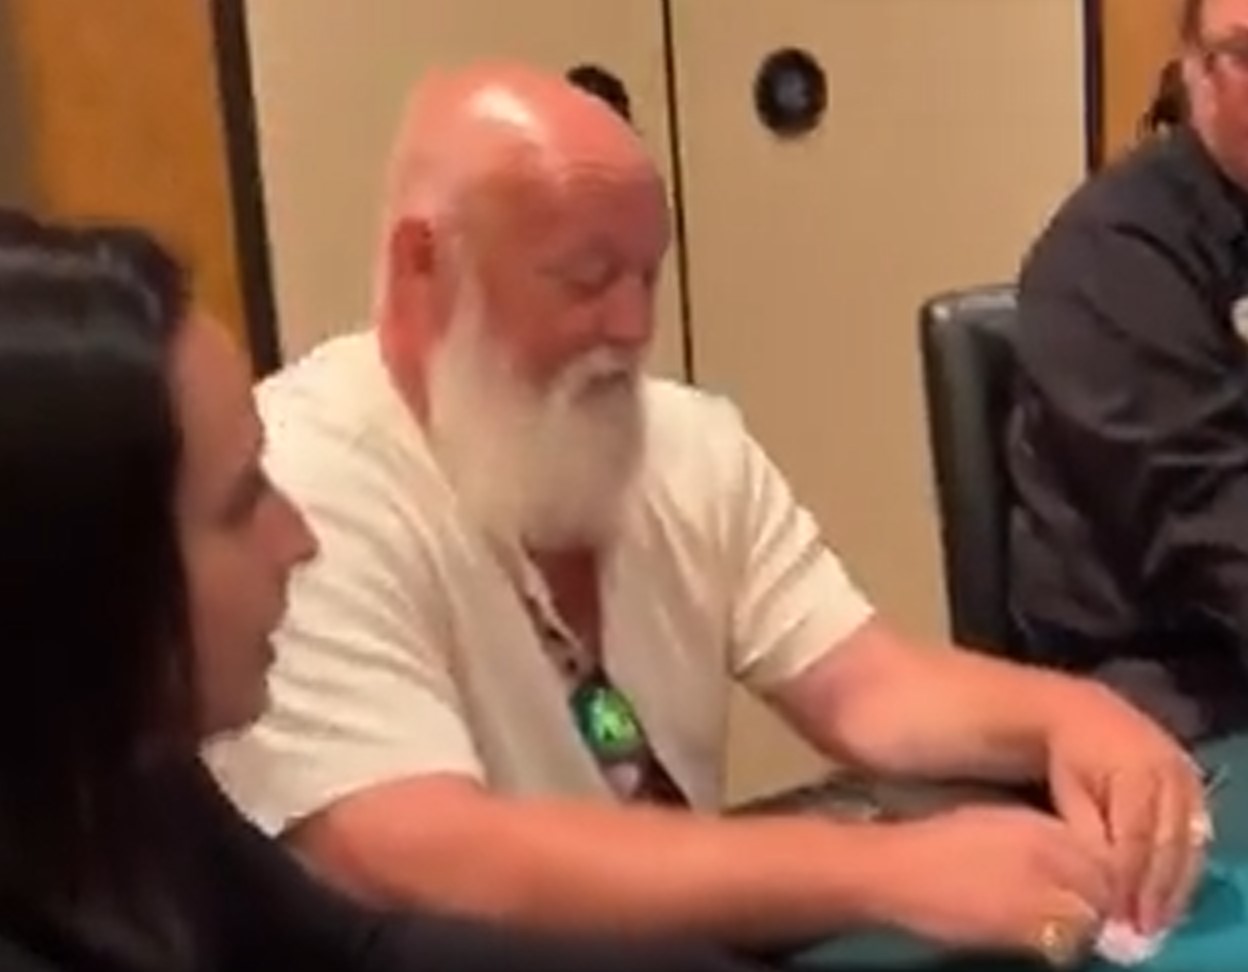 Man faces backlash after participating in women's poker tournament and winning 3